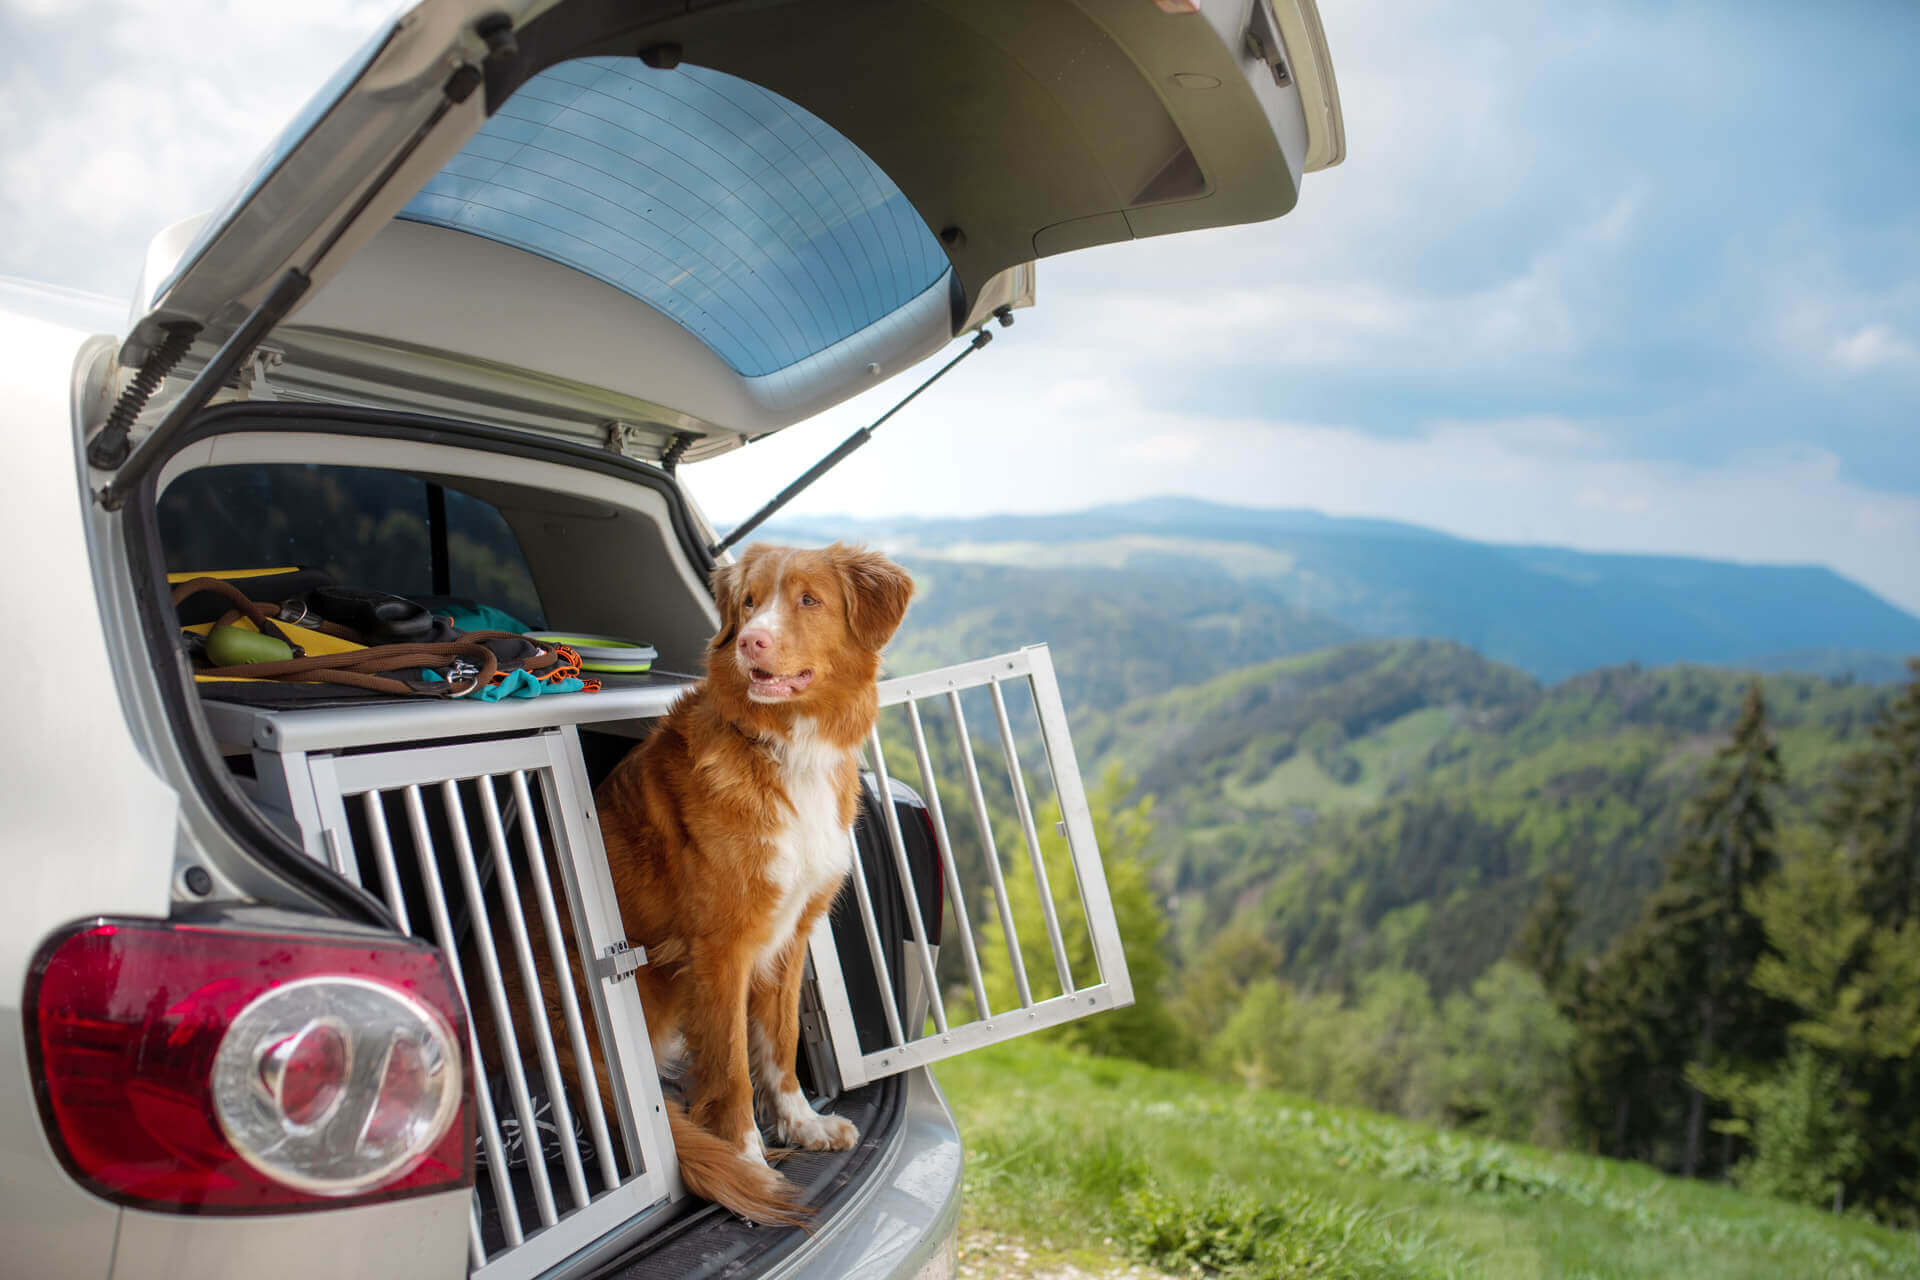 dog looking out of an open crate in the open trunk of a car mountains in the background